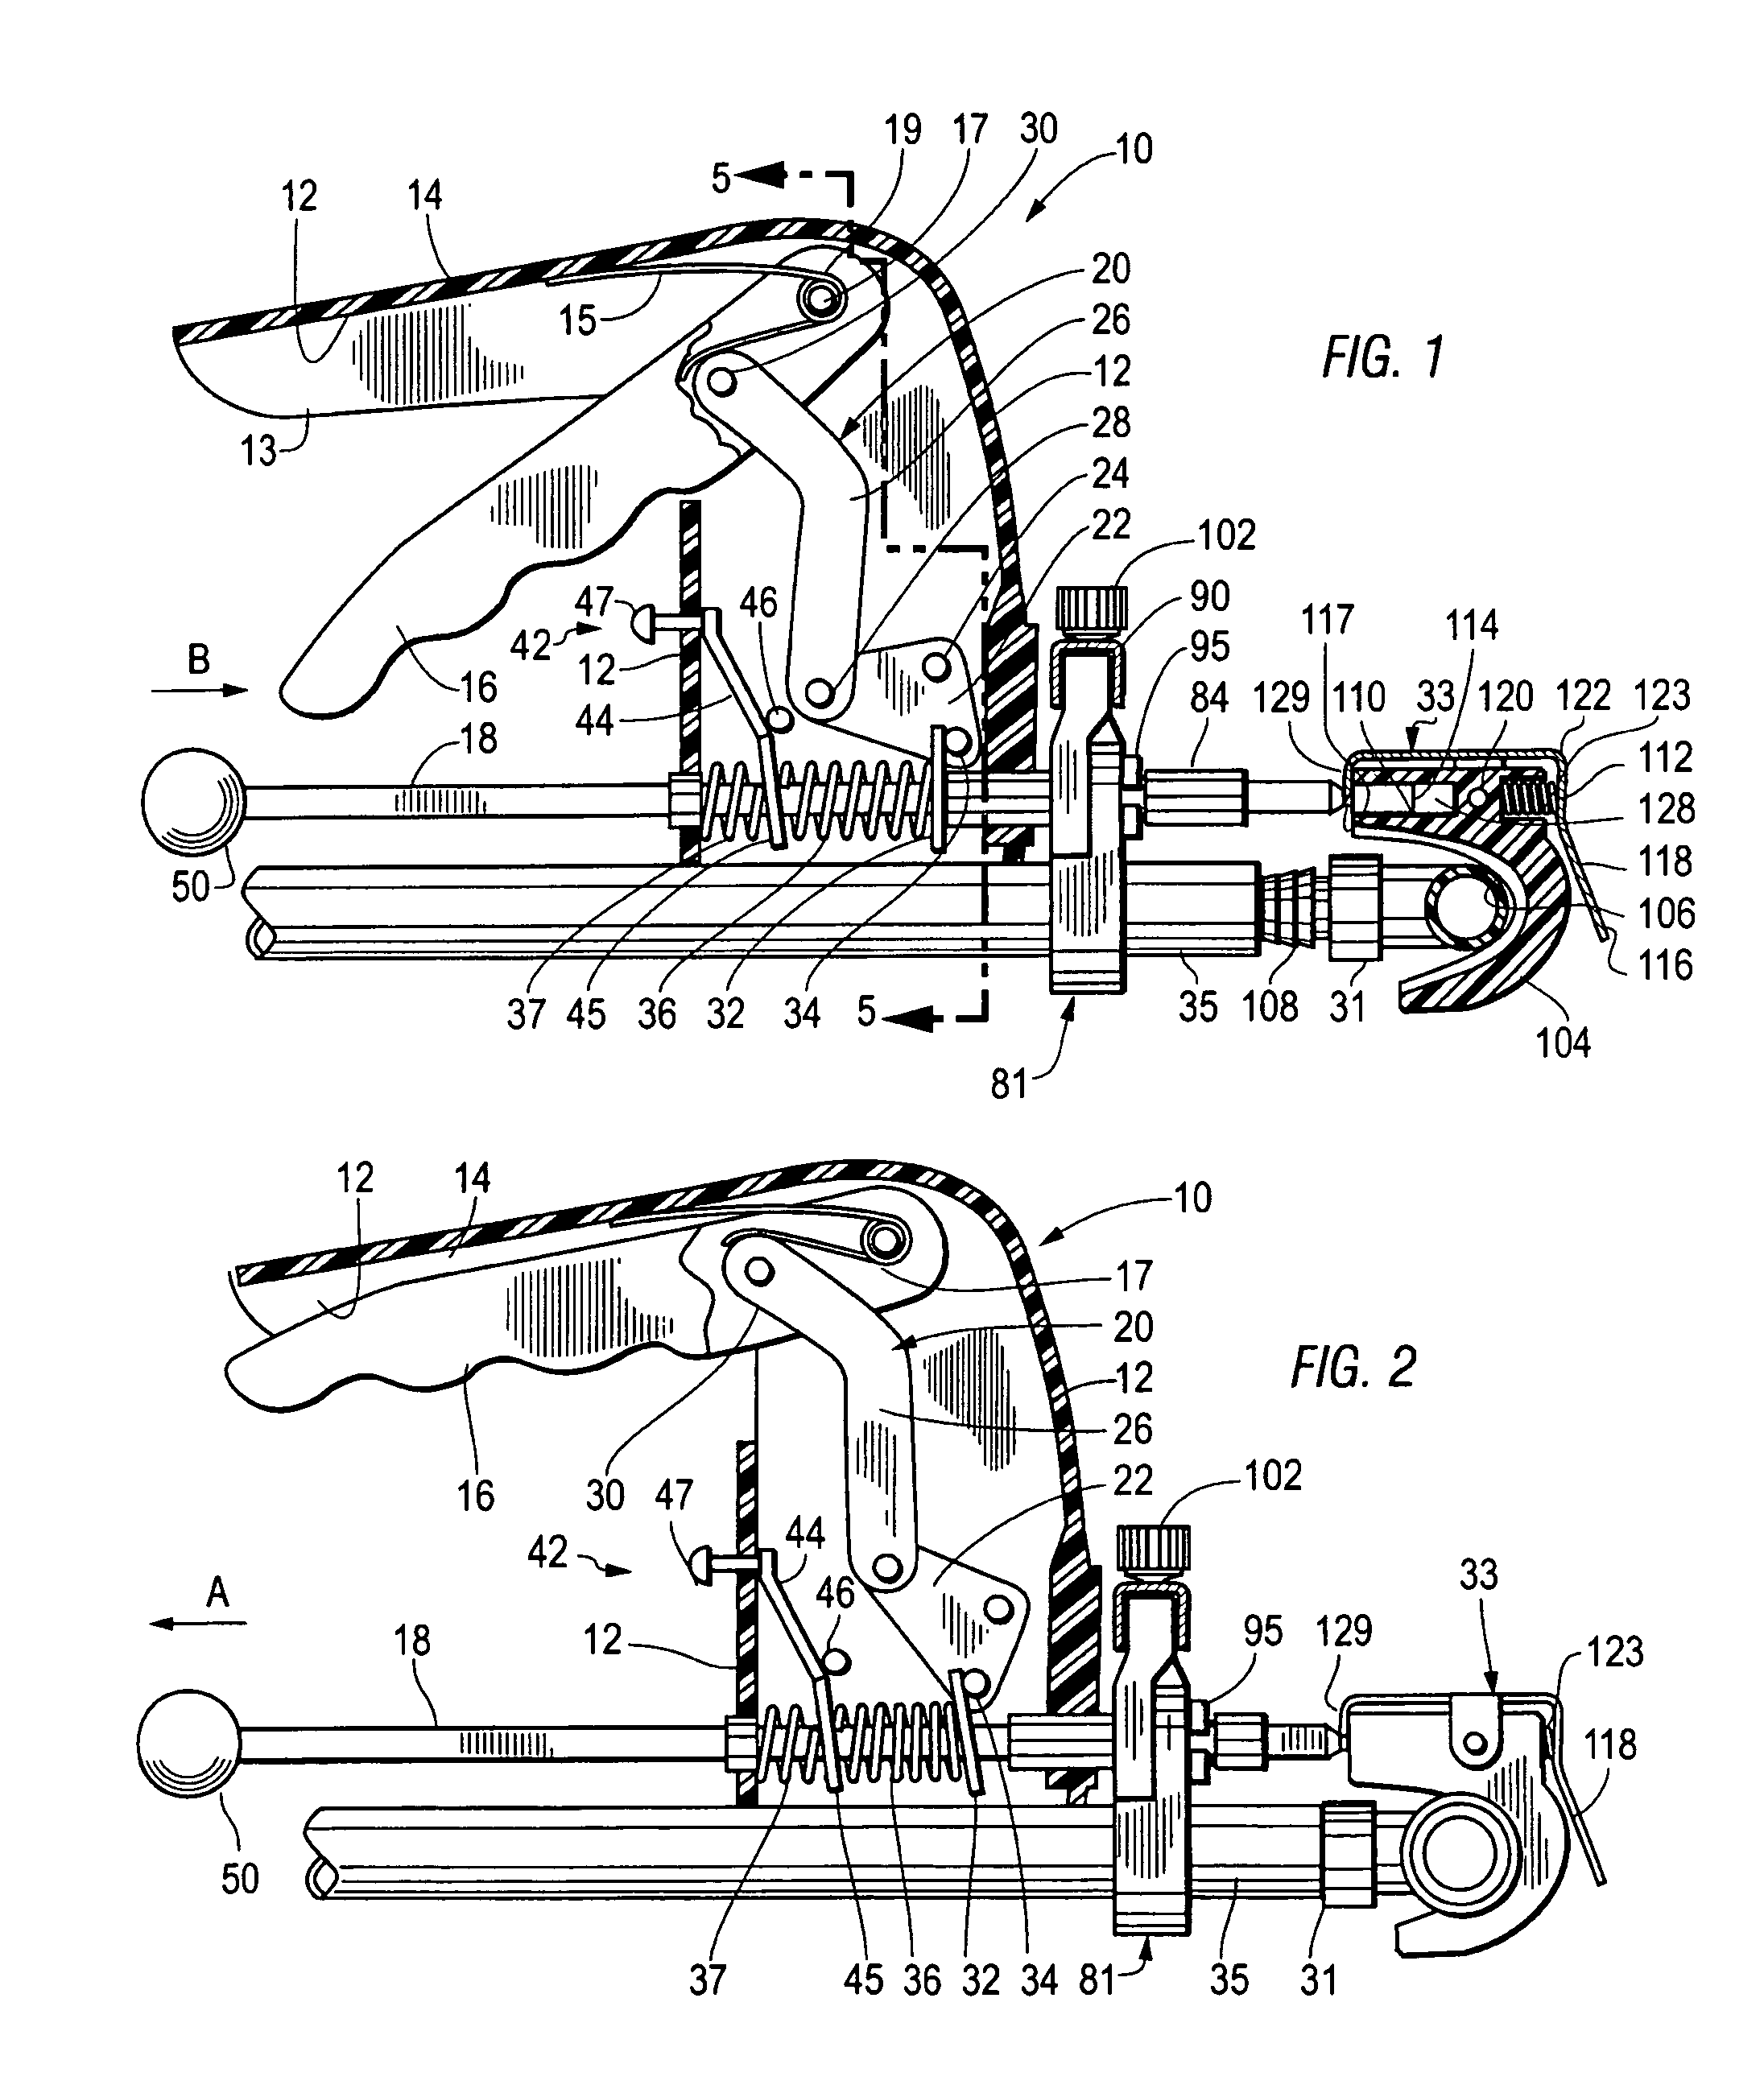 Tool for inserting plastic flexible hose to fittings